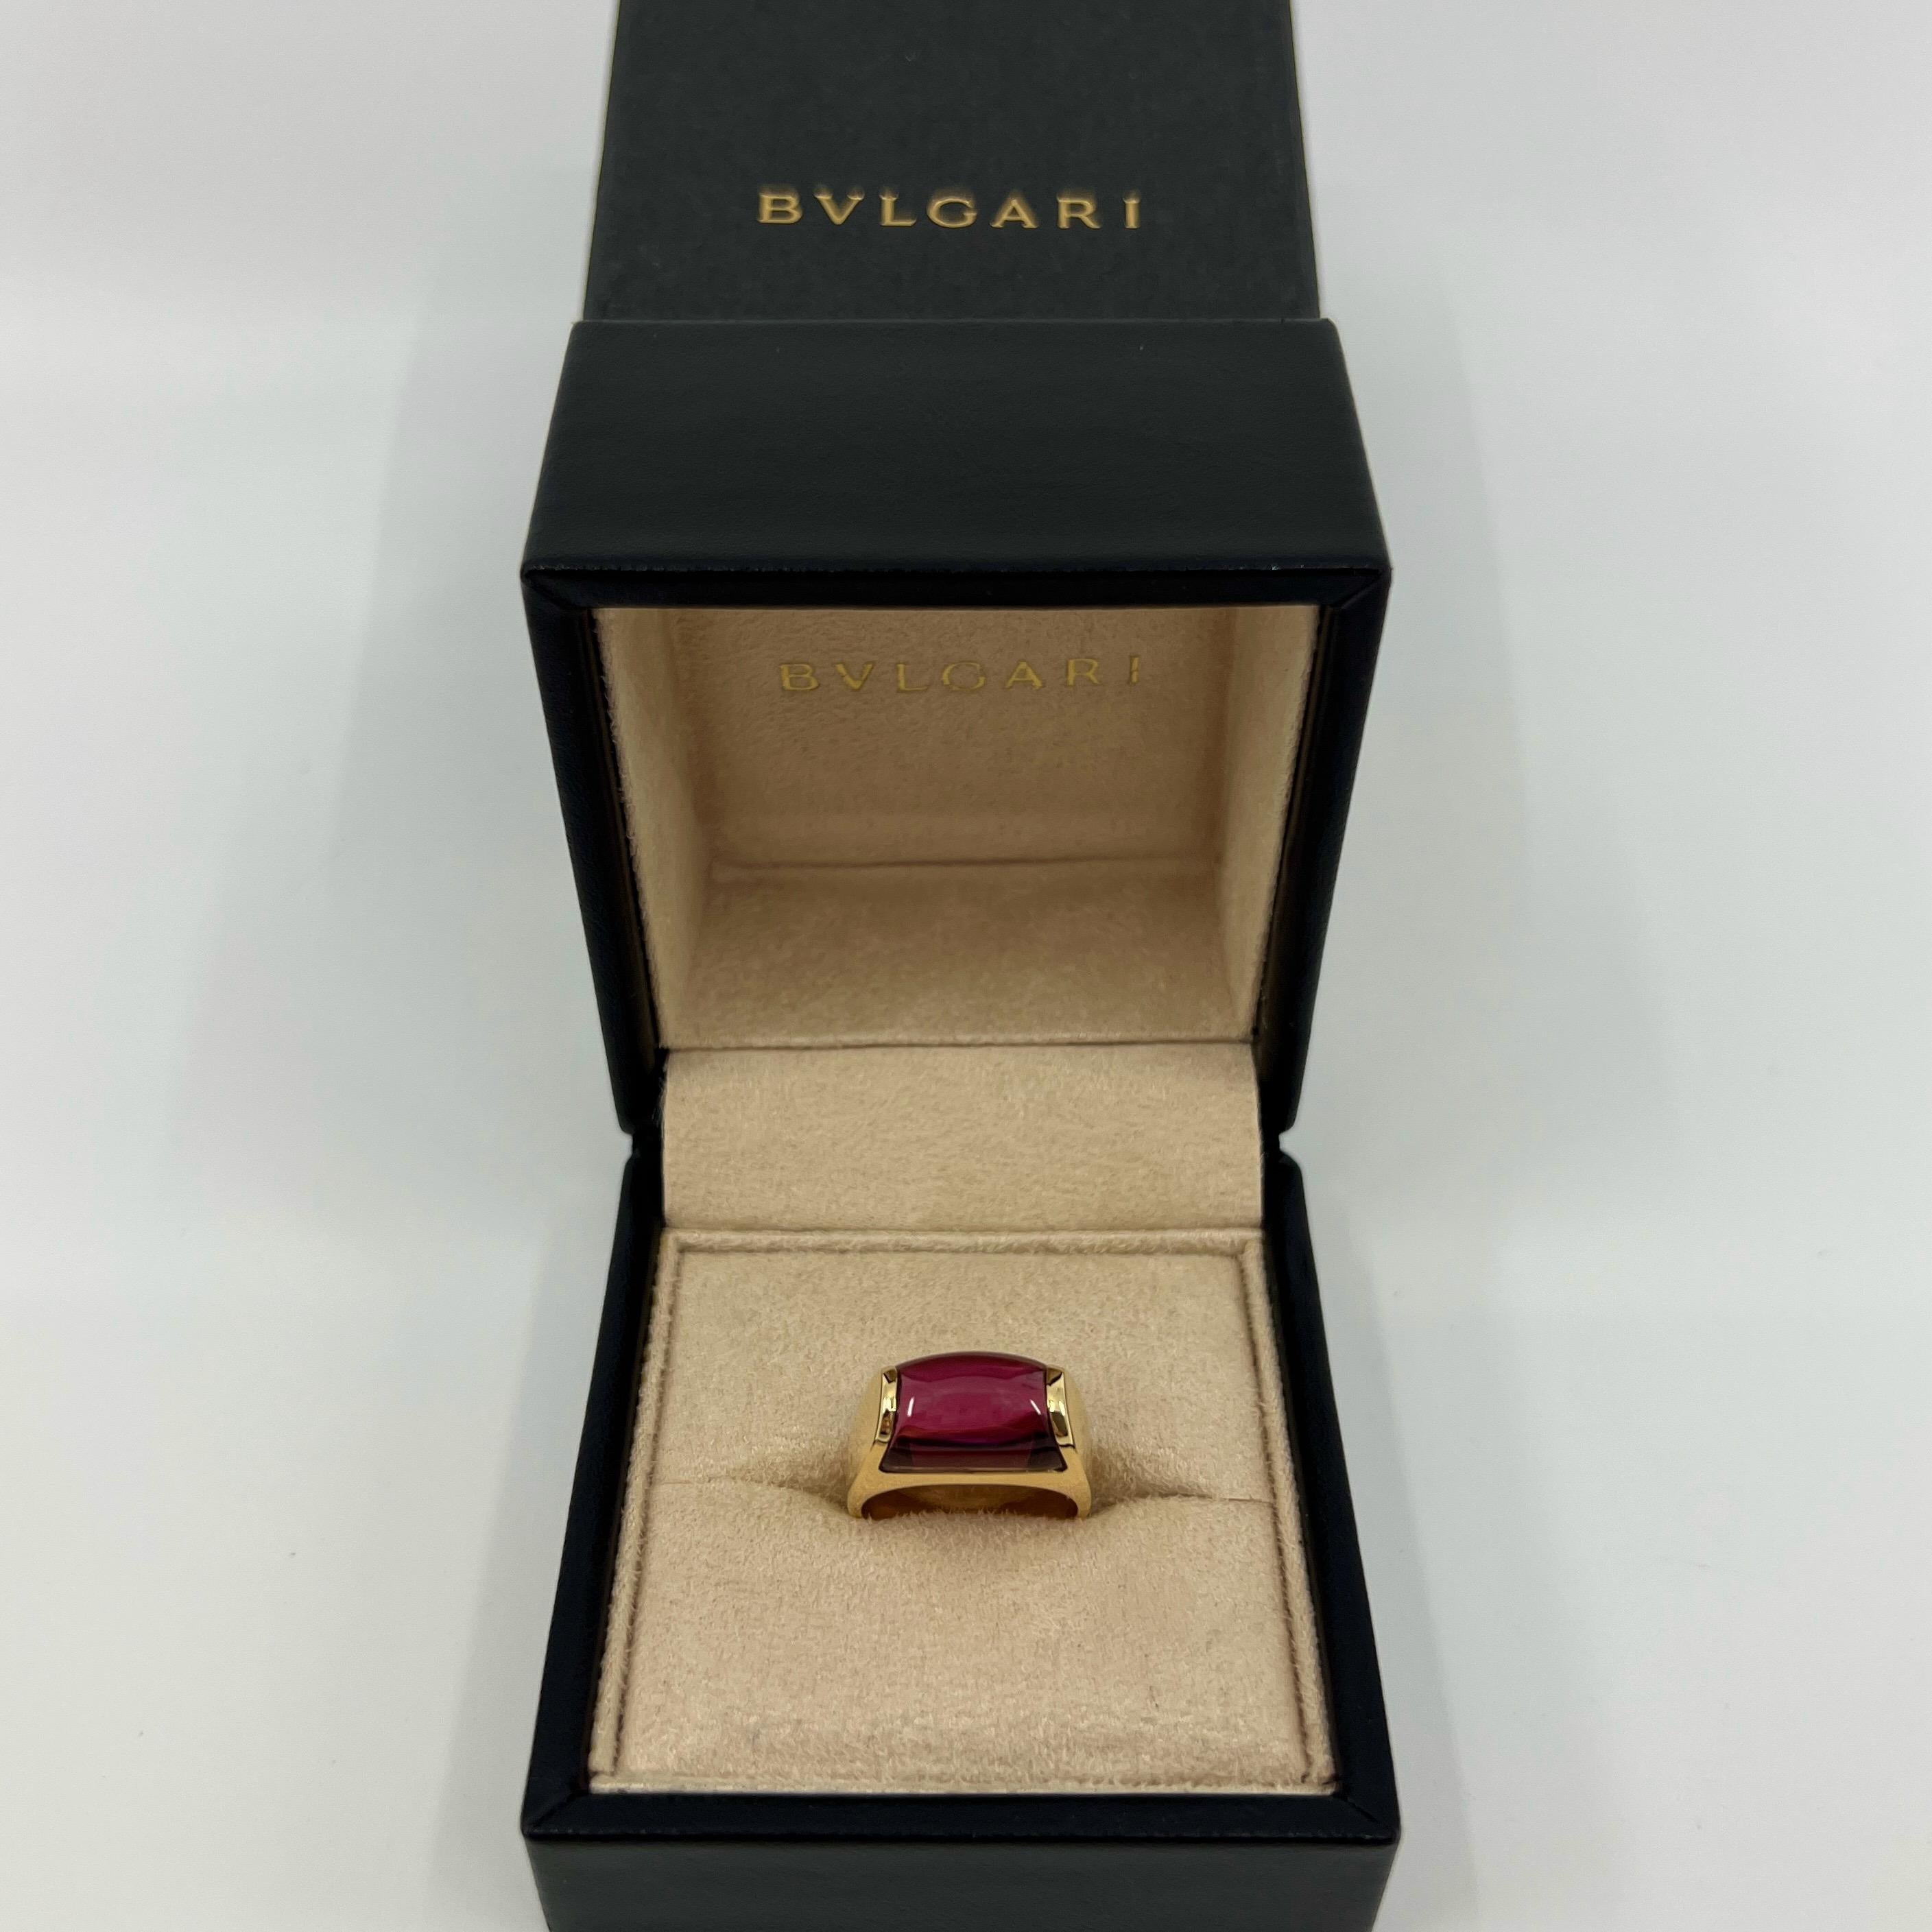 Rare Bvlgari Pink Rubellite Tourmaline Tronchetto 18k Yellow Gold Ring.

Beautiful domed rubellite pink tourmaline set in a fine 18k yellow gold tension set ring.

In excellent condition, has been professionally polished and cleaned.

Ring size: UK